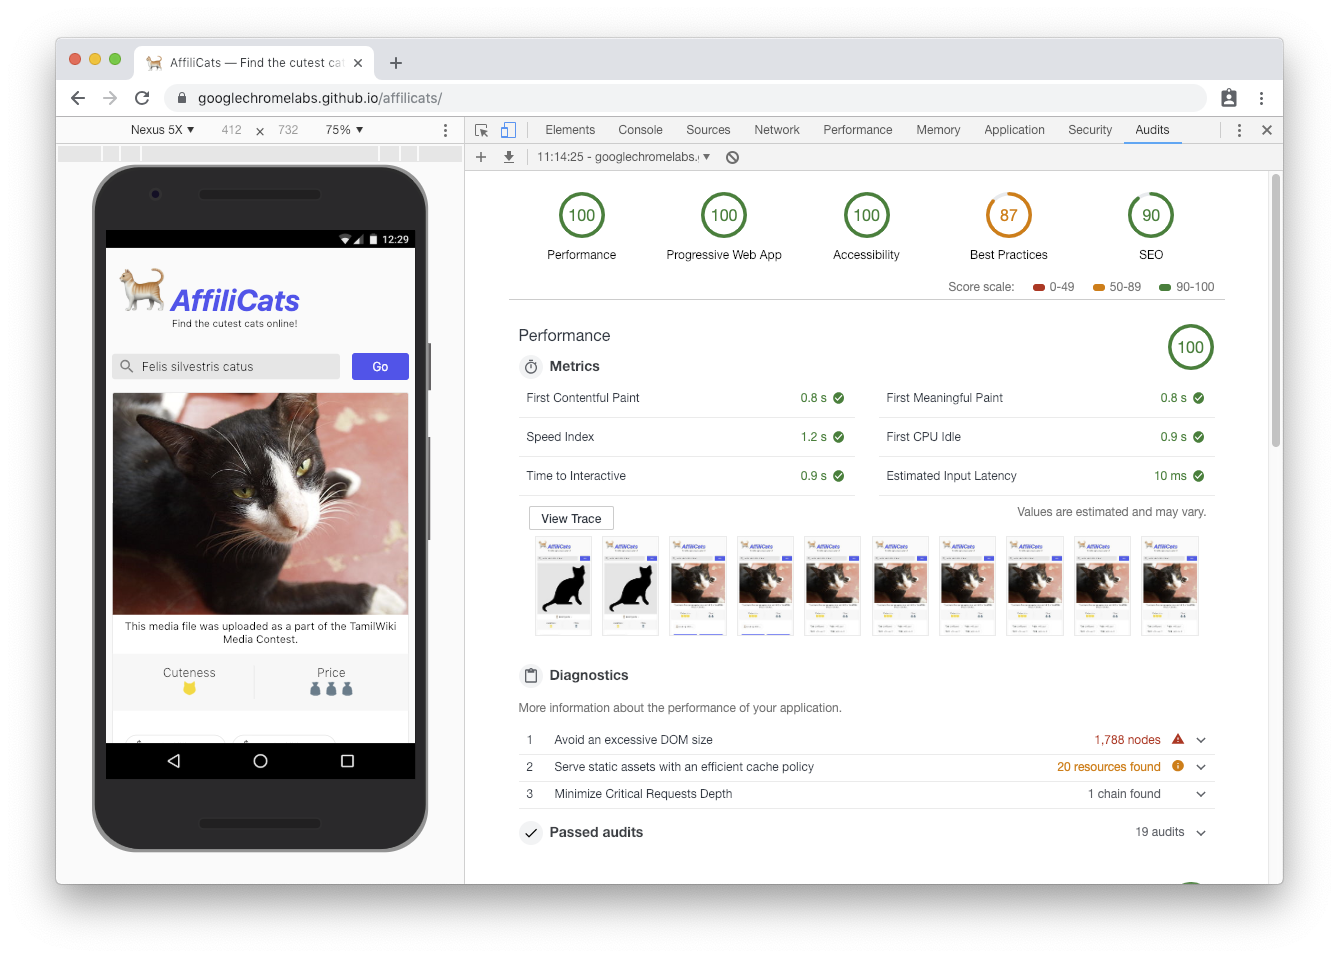 🐈 AffiliCats meets the PWA installability quality bar in Lighthouse.